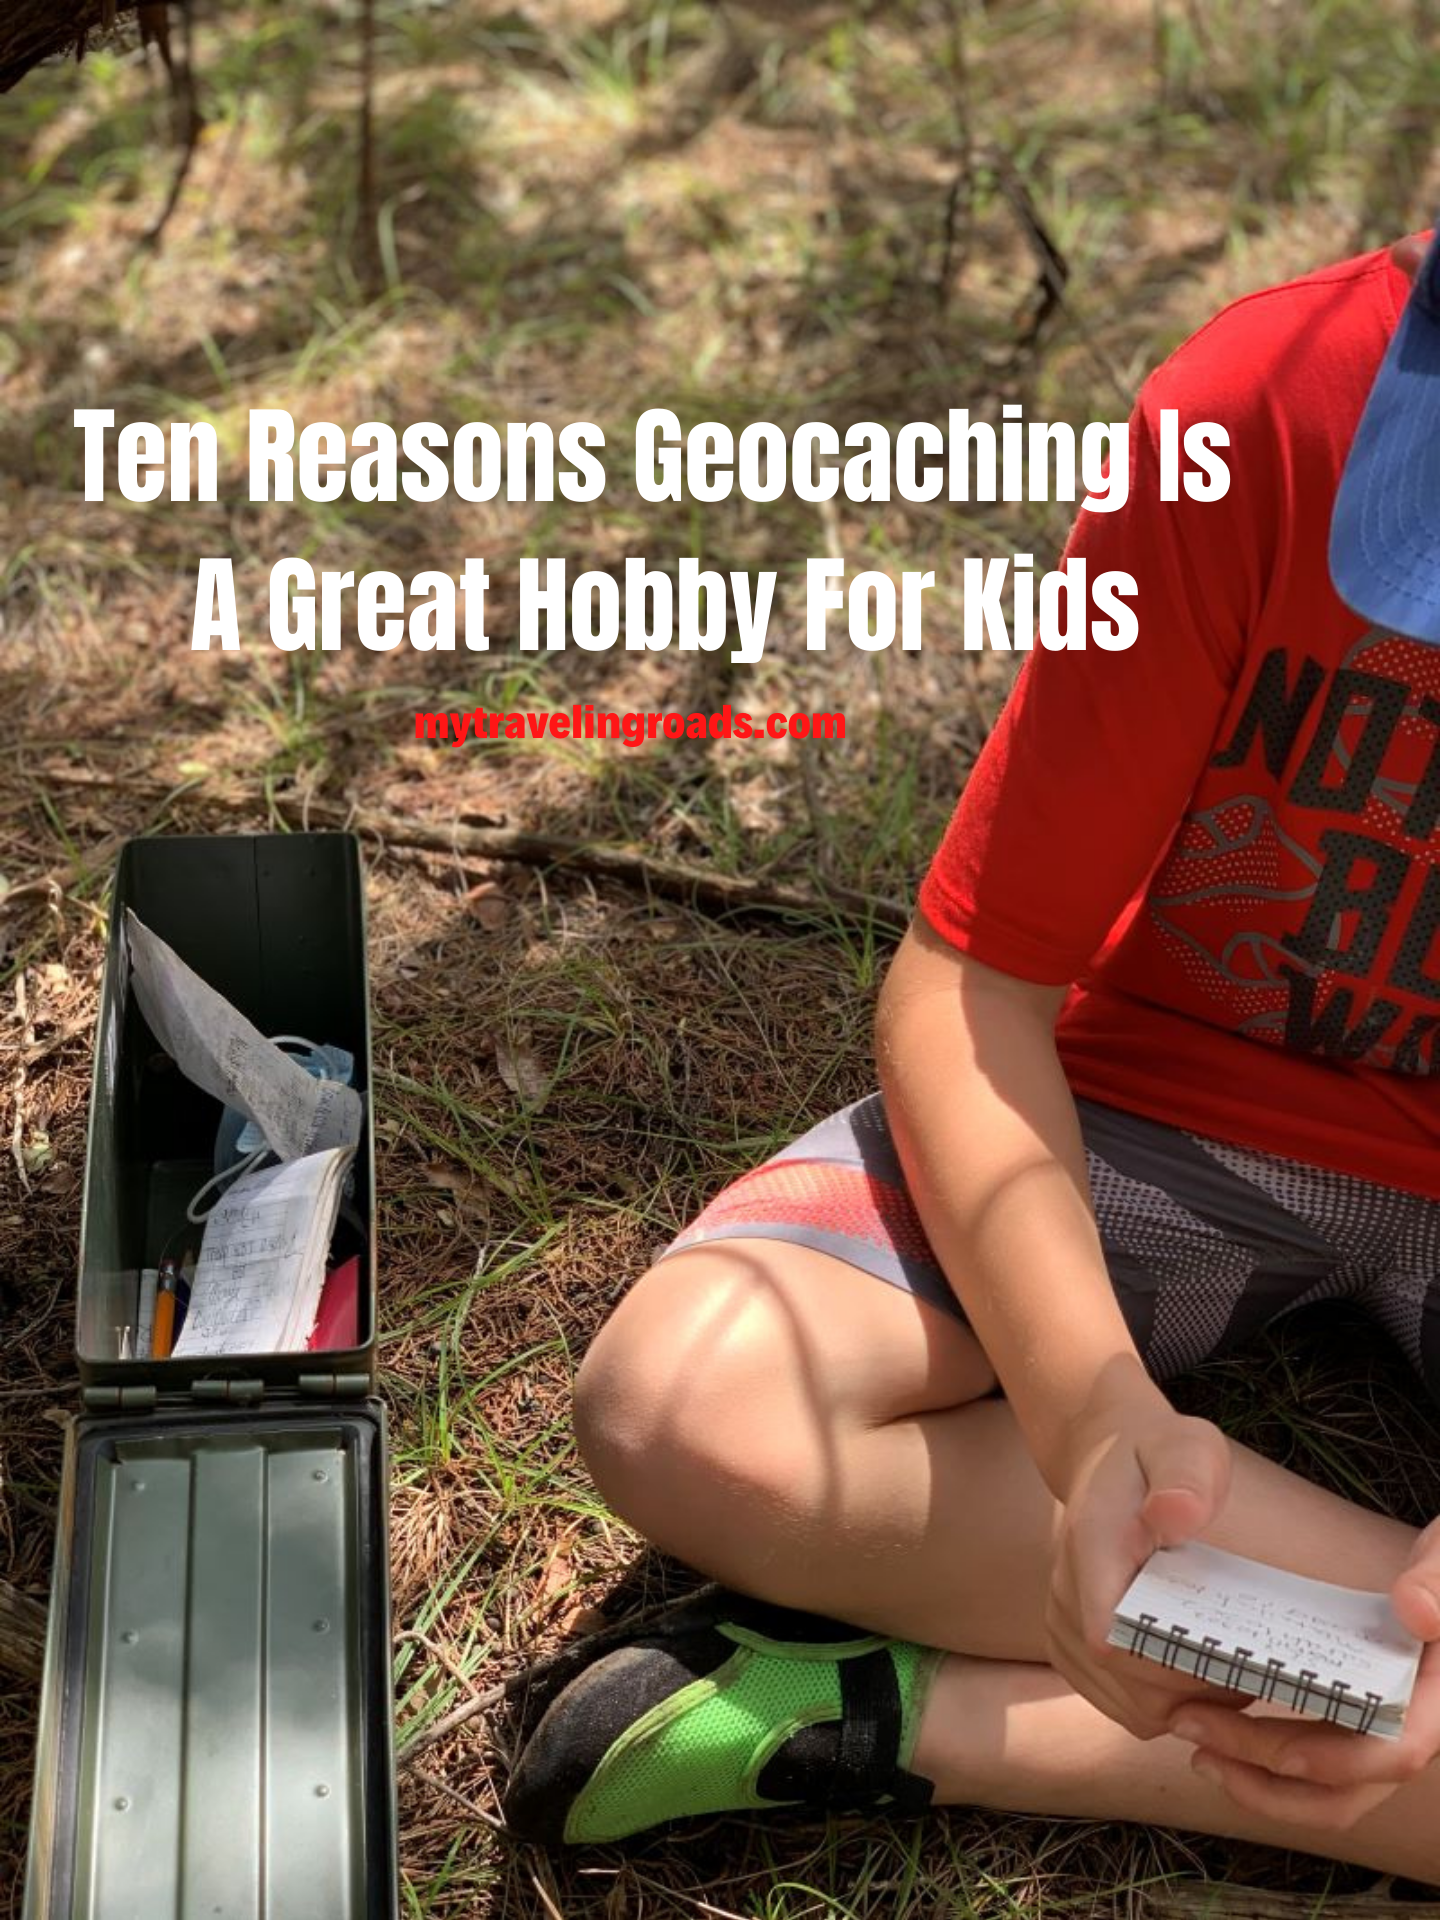 Ten Reasons Geocaching Is A Great Hobby